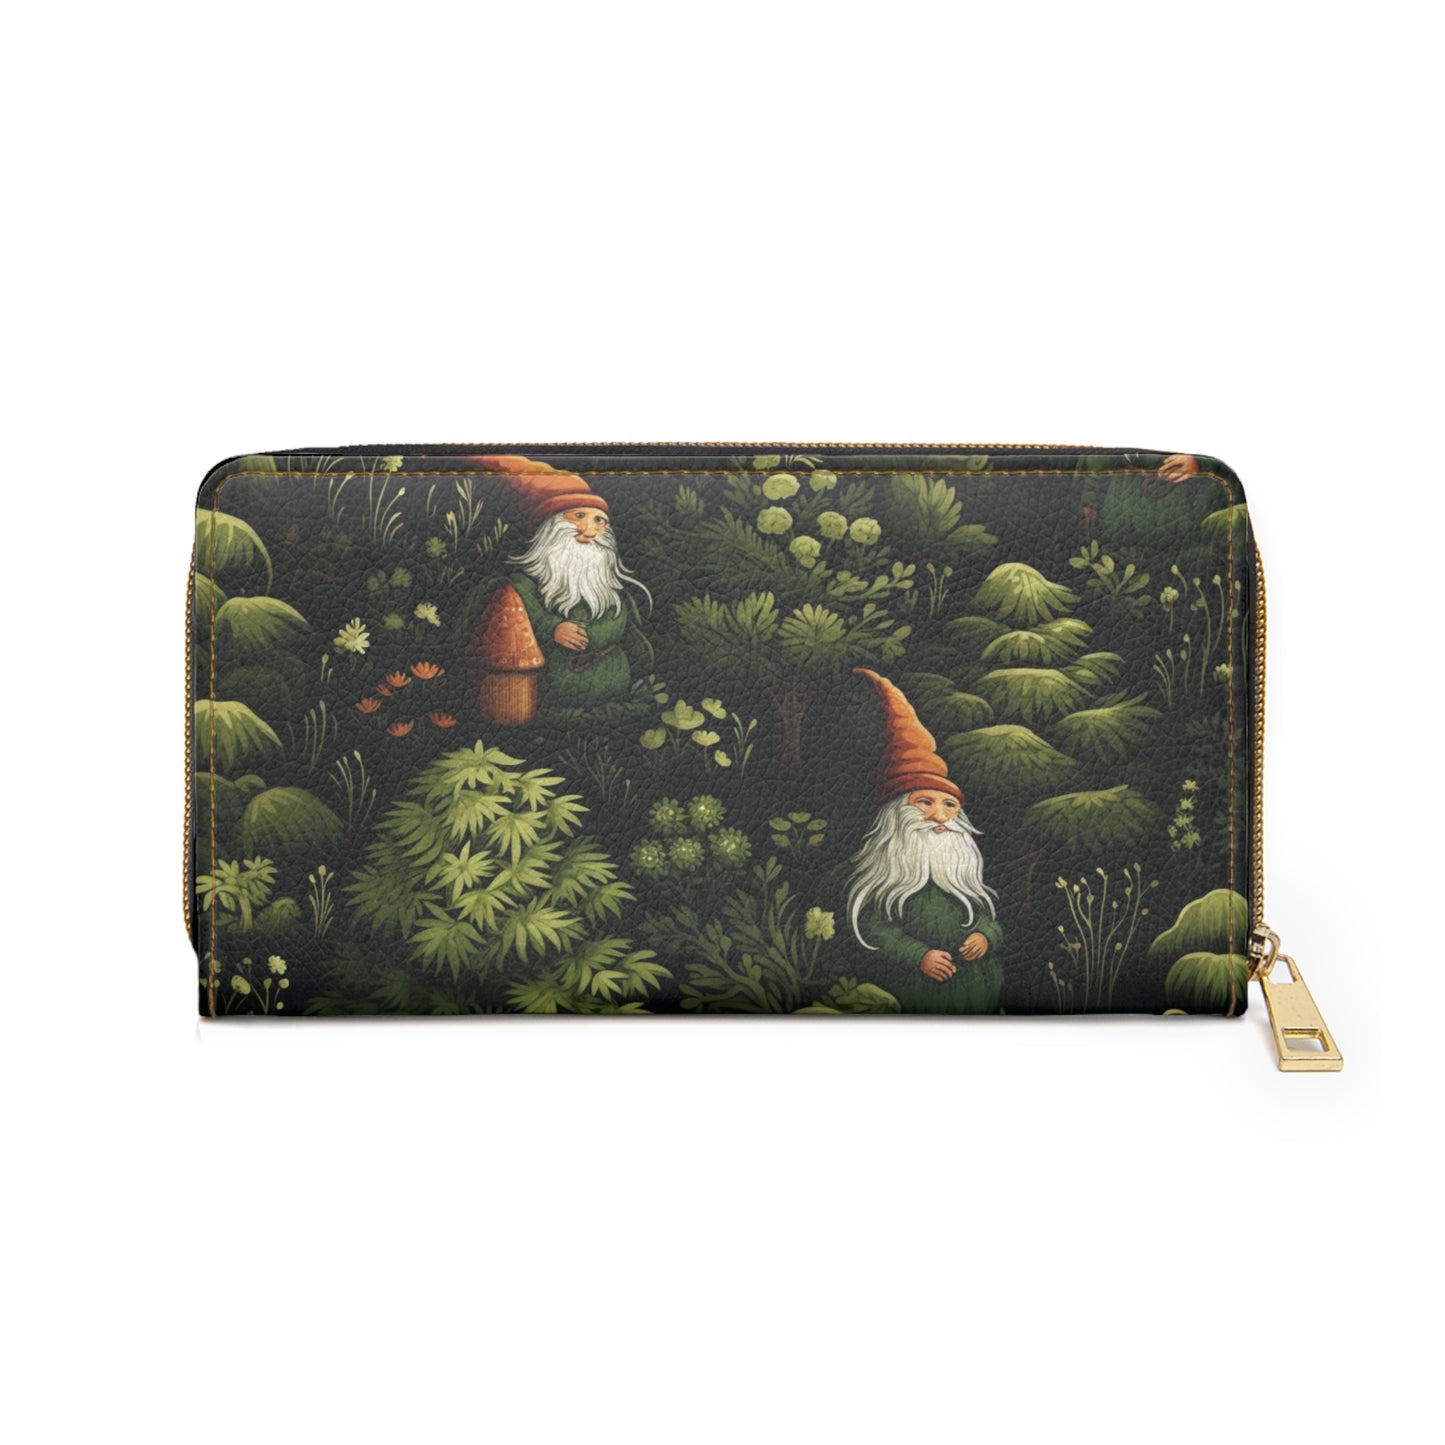 Happy Gnomes Wallet | Dark Forest Old Man Gnomes Sturdy Zipper Wallet